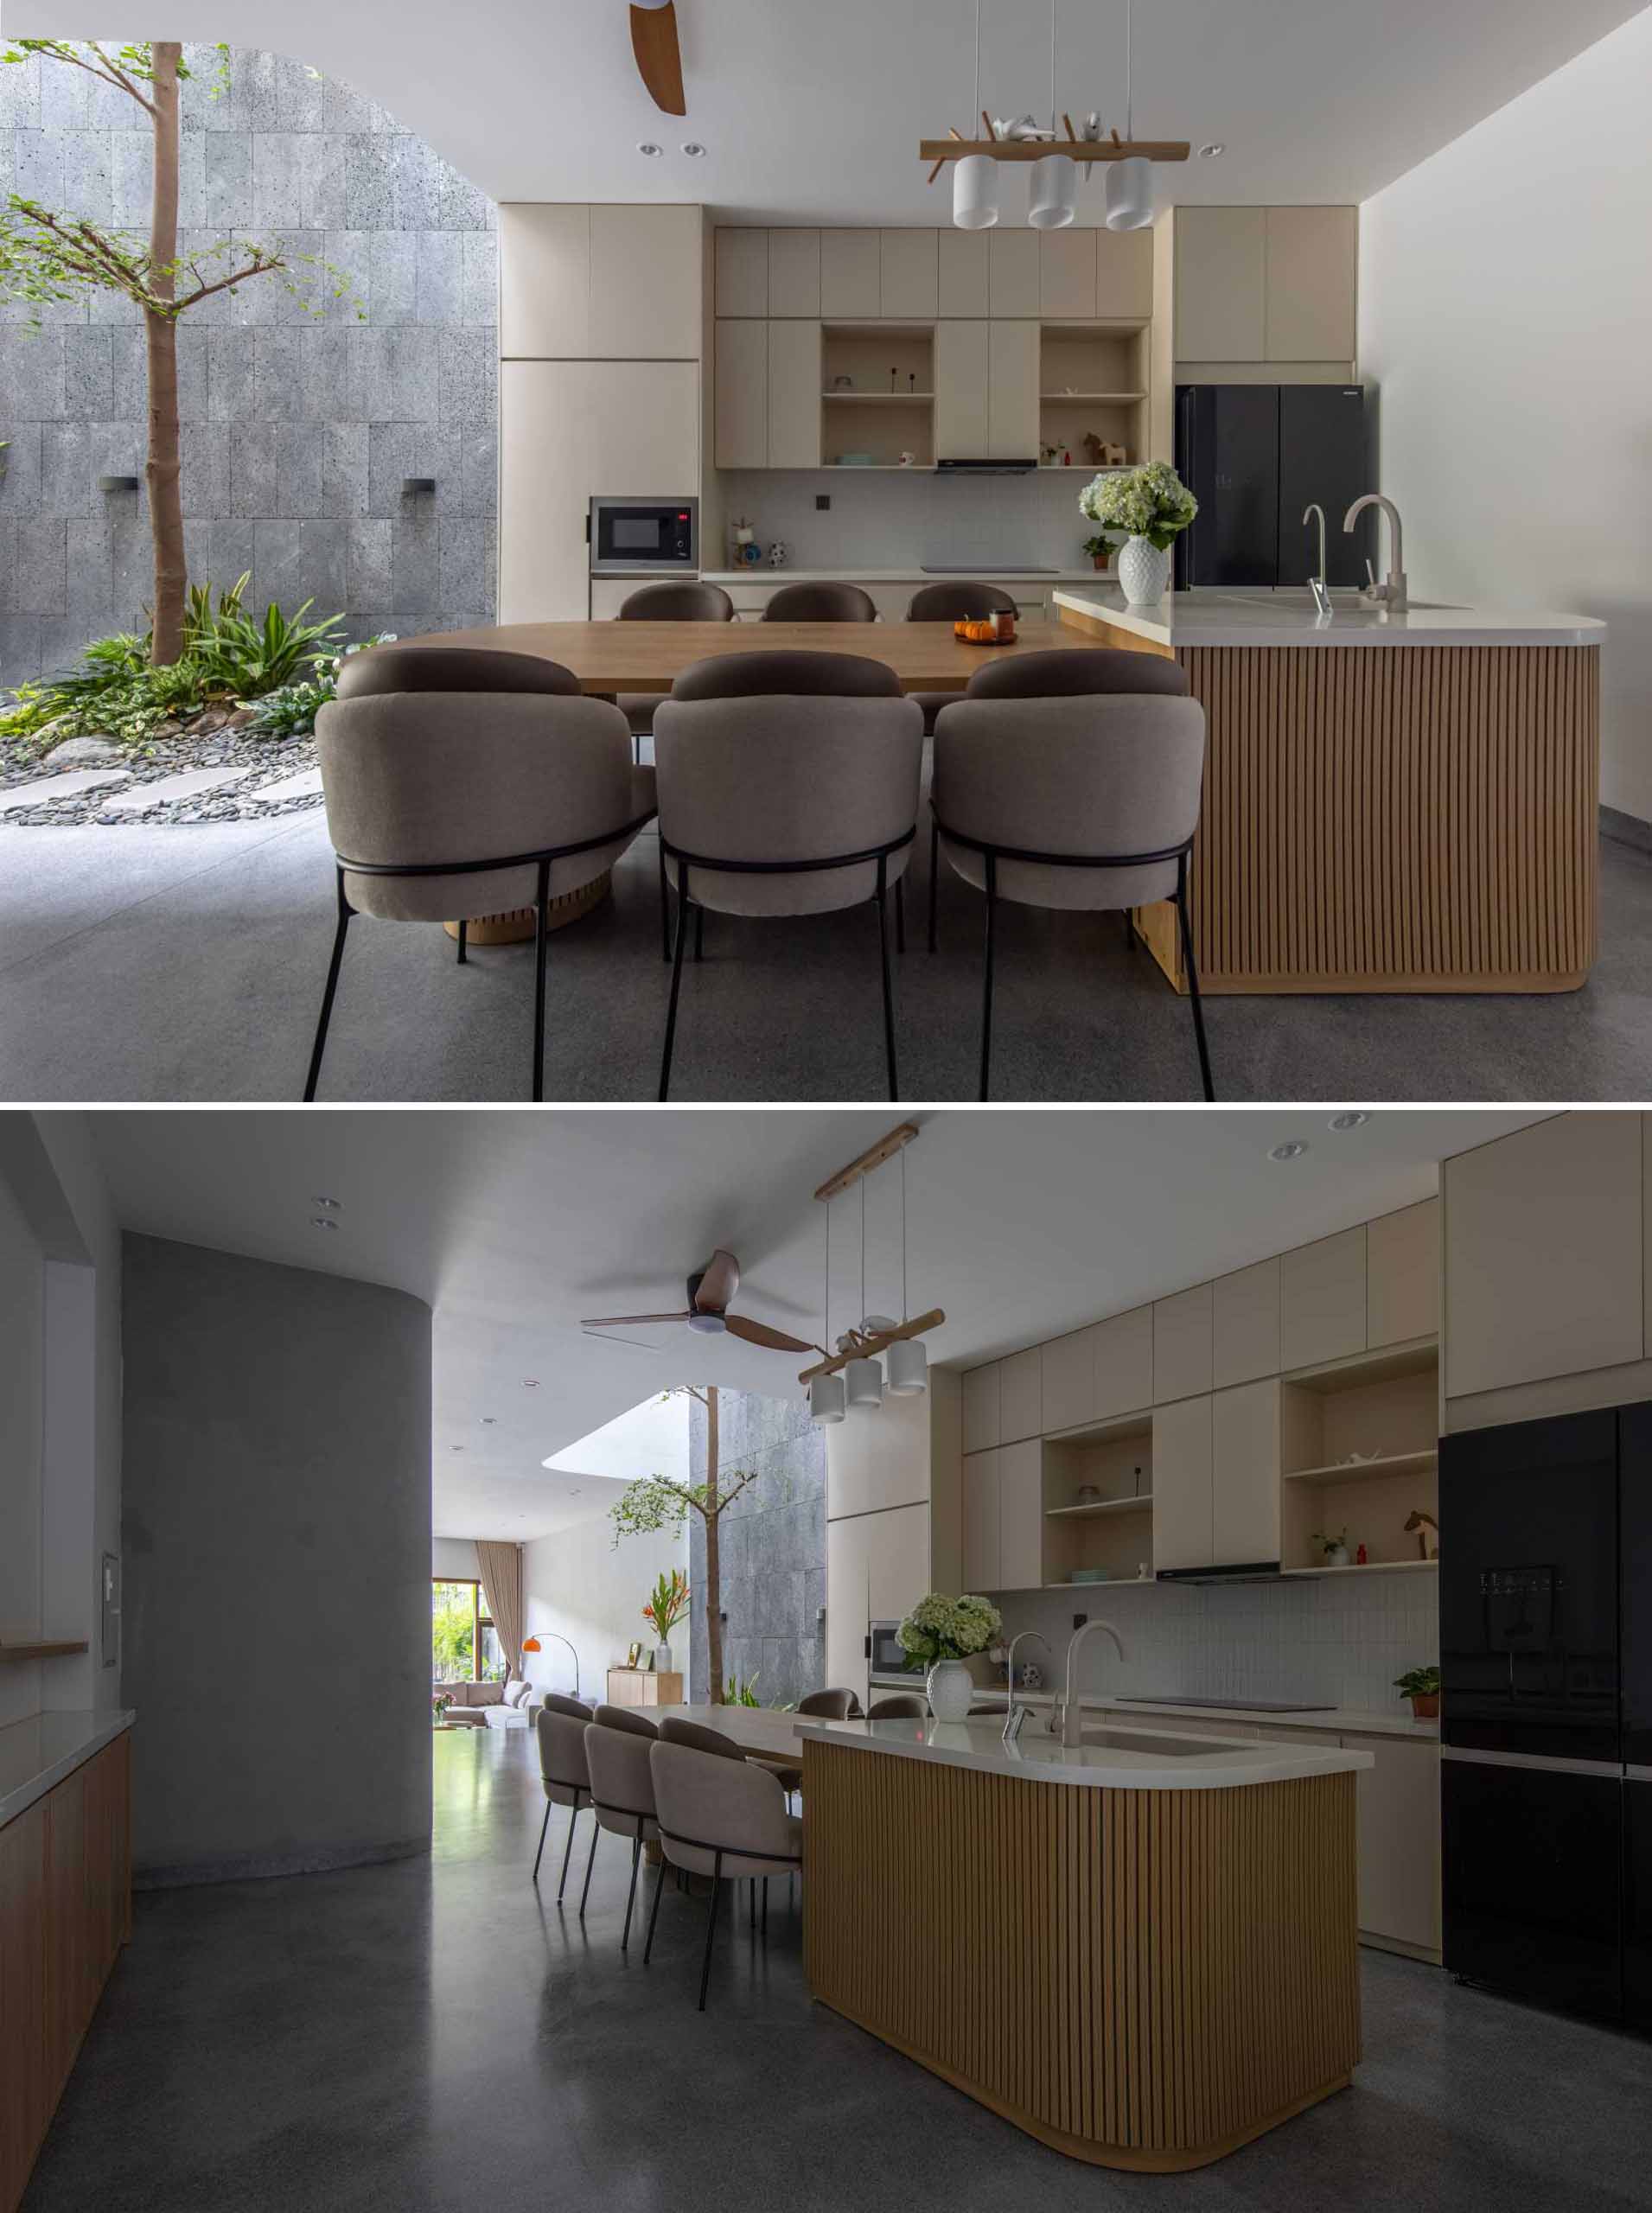 In this modern home interior, the dining area and the kitchen are combined, with the dining table integrated into the island.